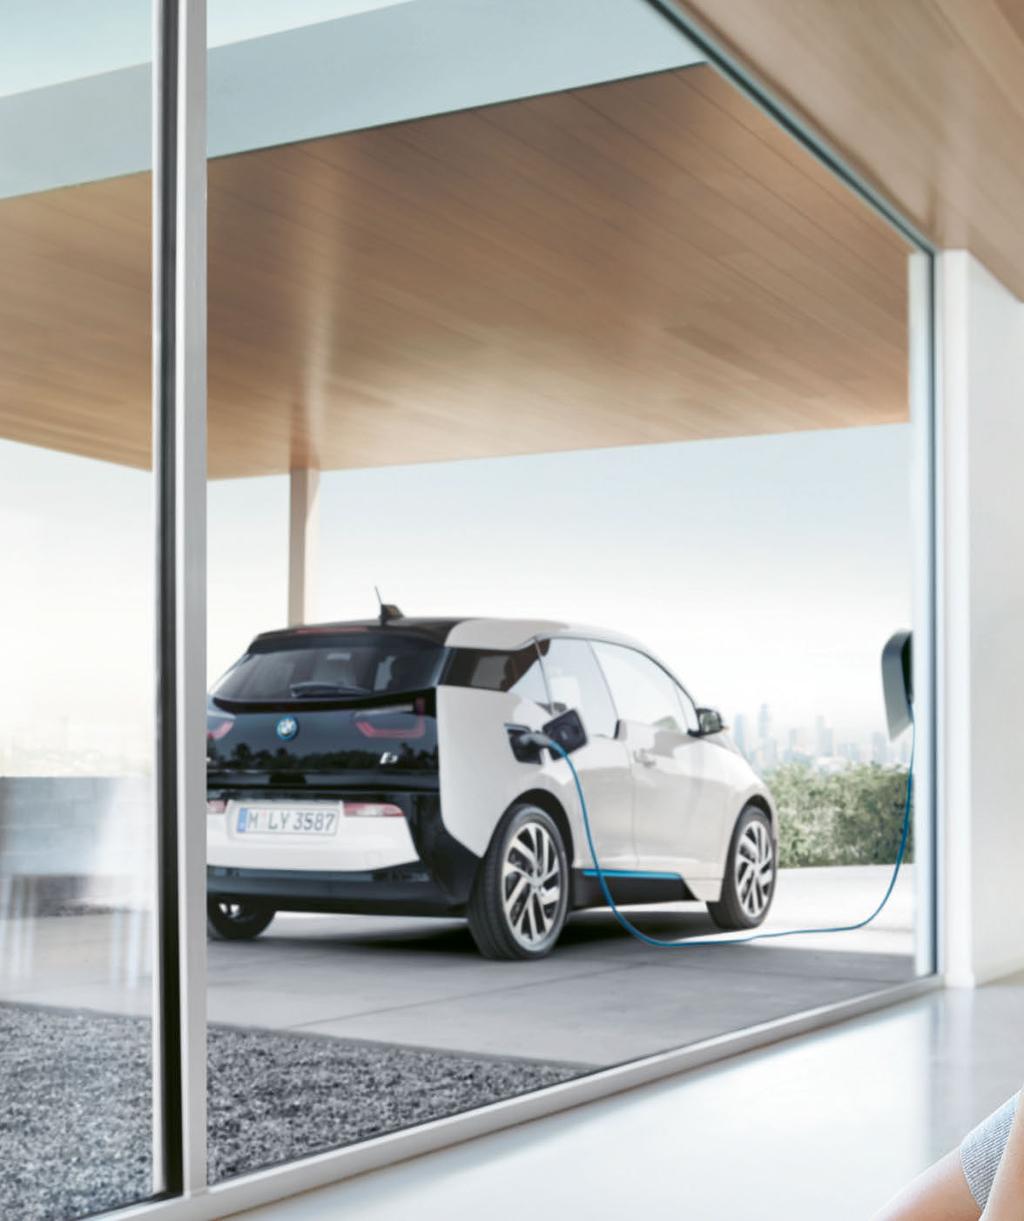 INTELLIGENT NETWORK. SEAMLESS CONNECTION. THE BMW i3 16 17 The greatest inventions are those that make our lives easier. Take the BMW i3.